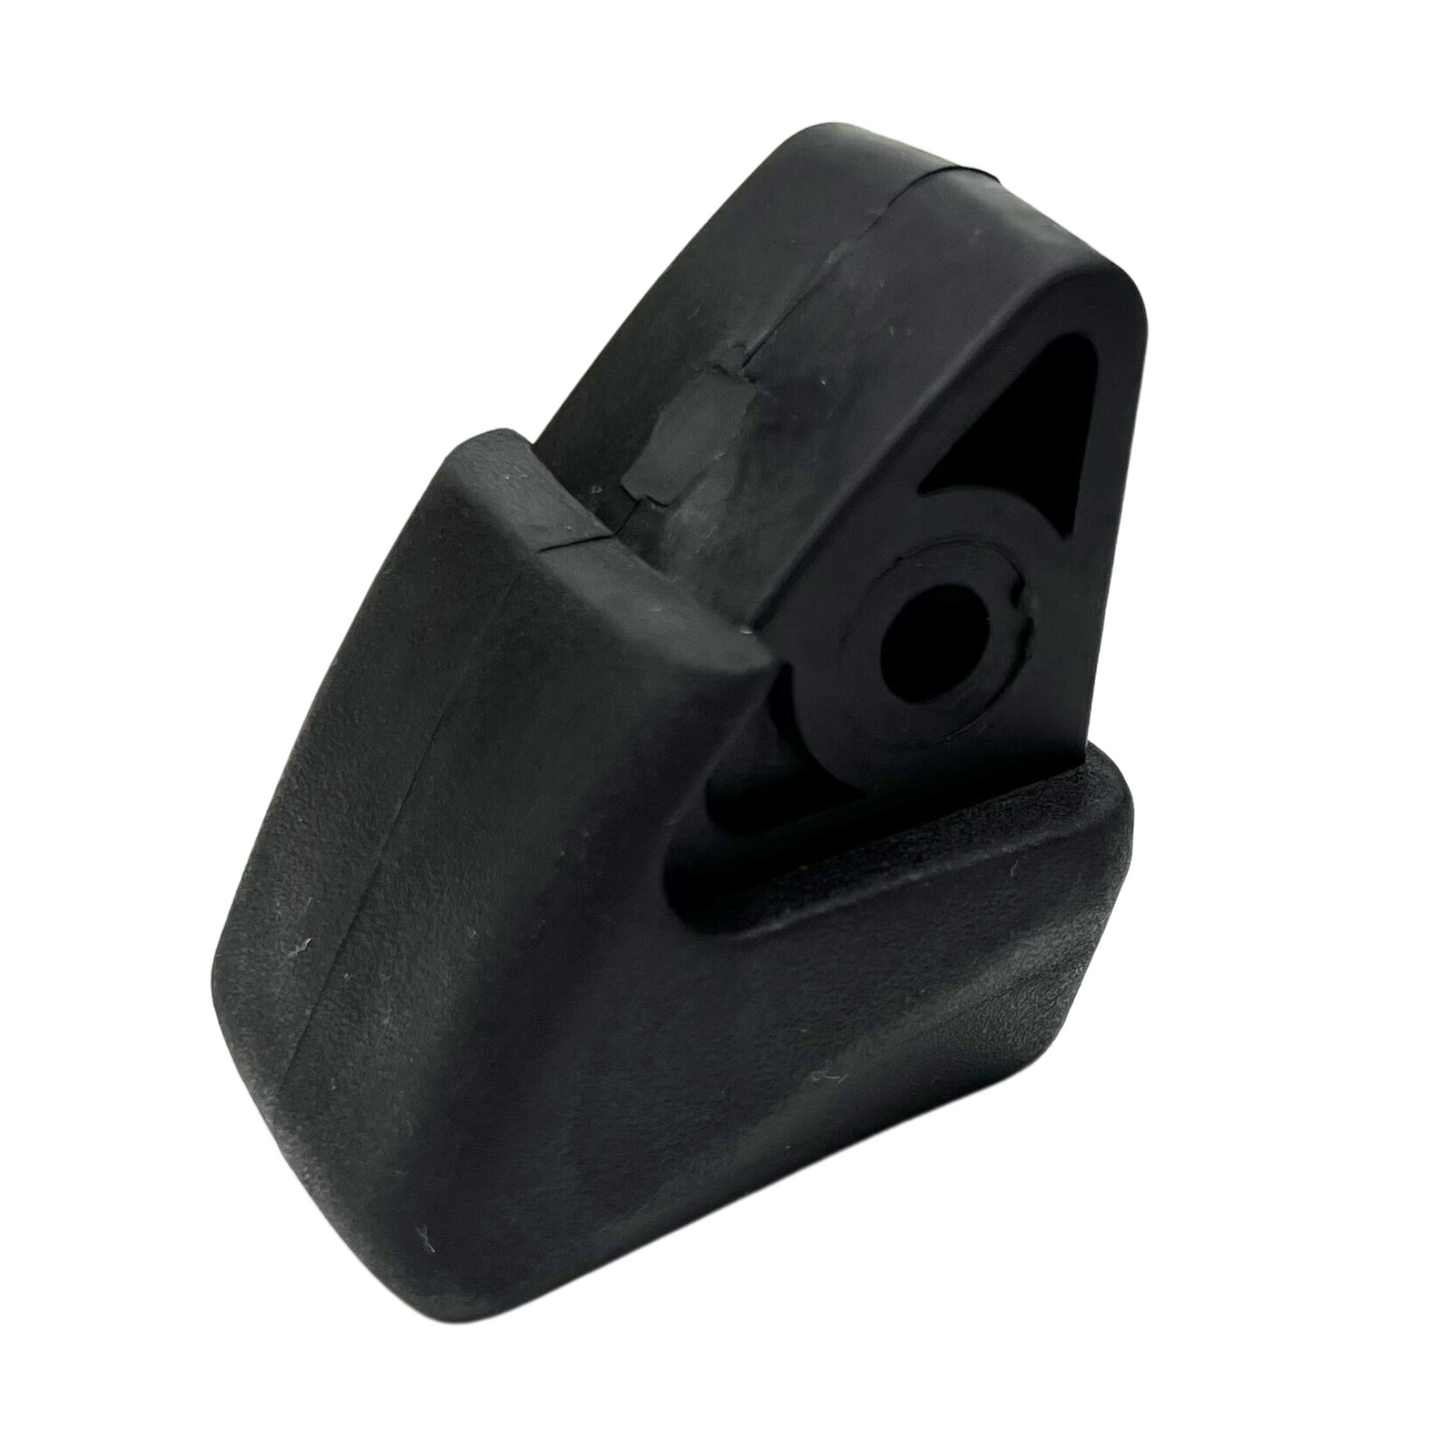 Replacement Heel Stop For Aerio Q80X Inline Skates